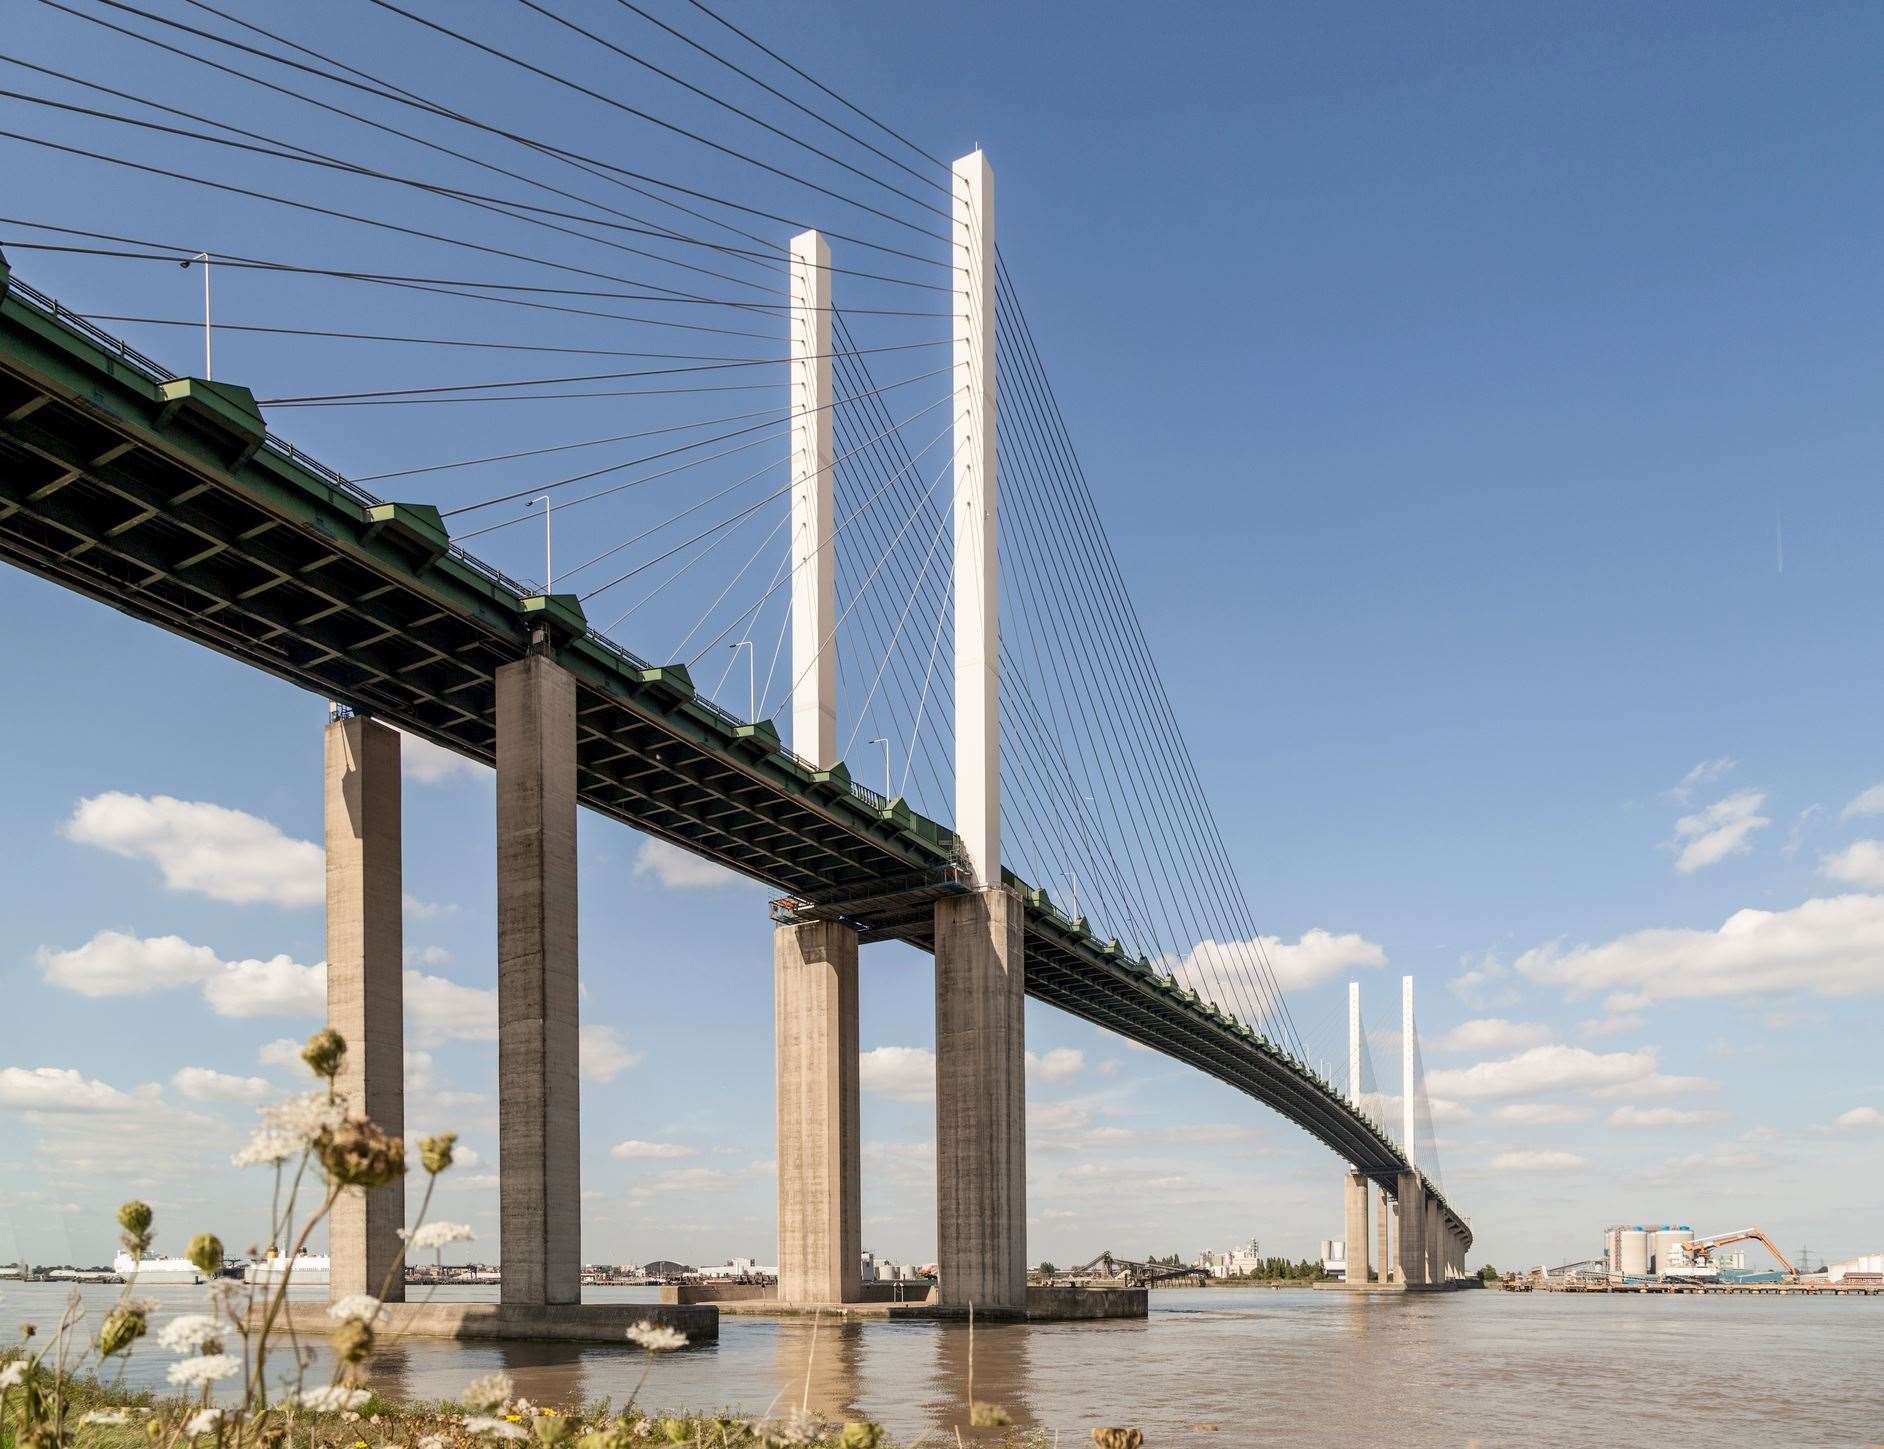 A man has died after an incident on the QEII Bridge in Dartford. Stock image